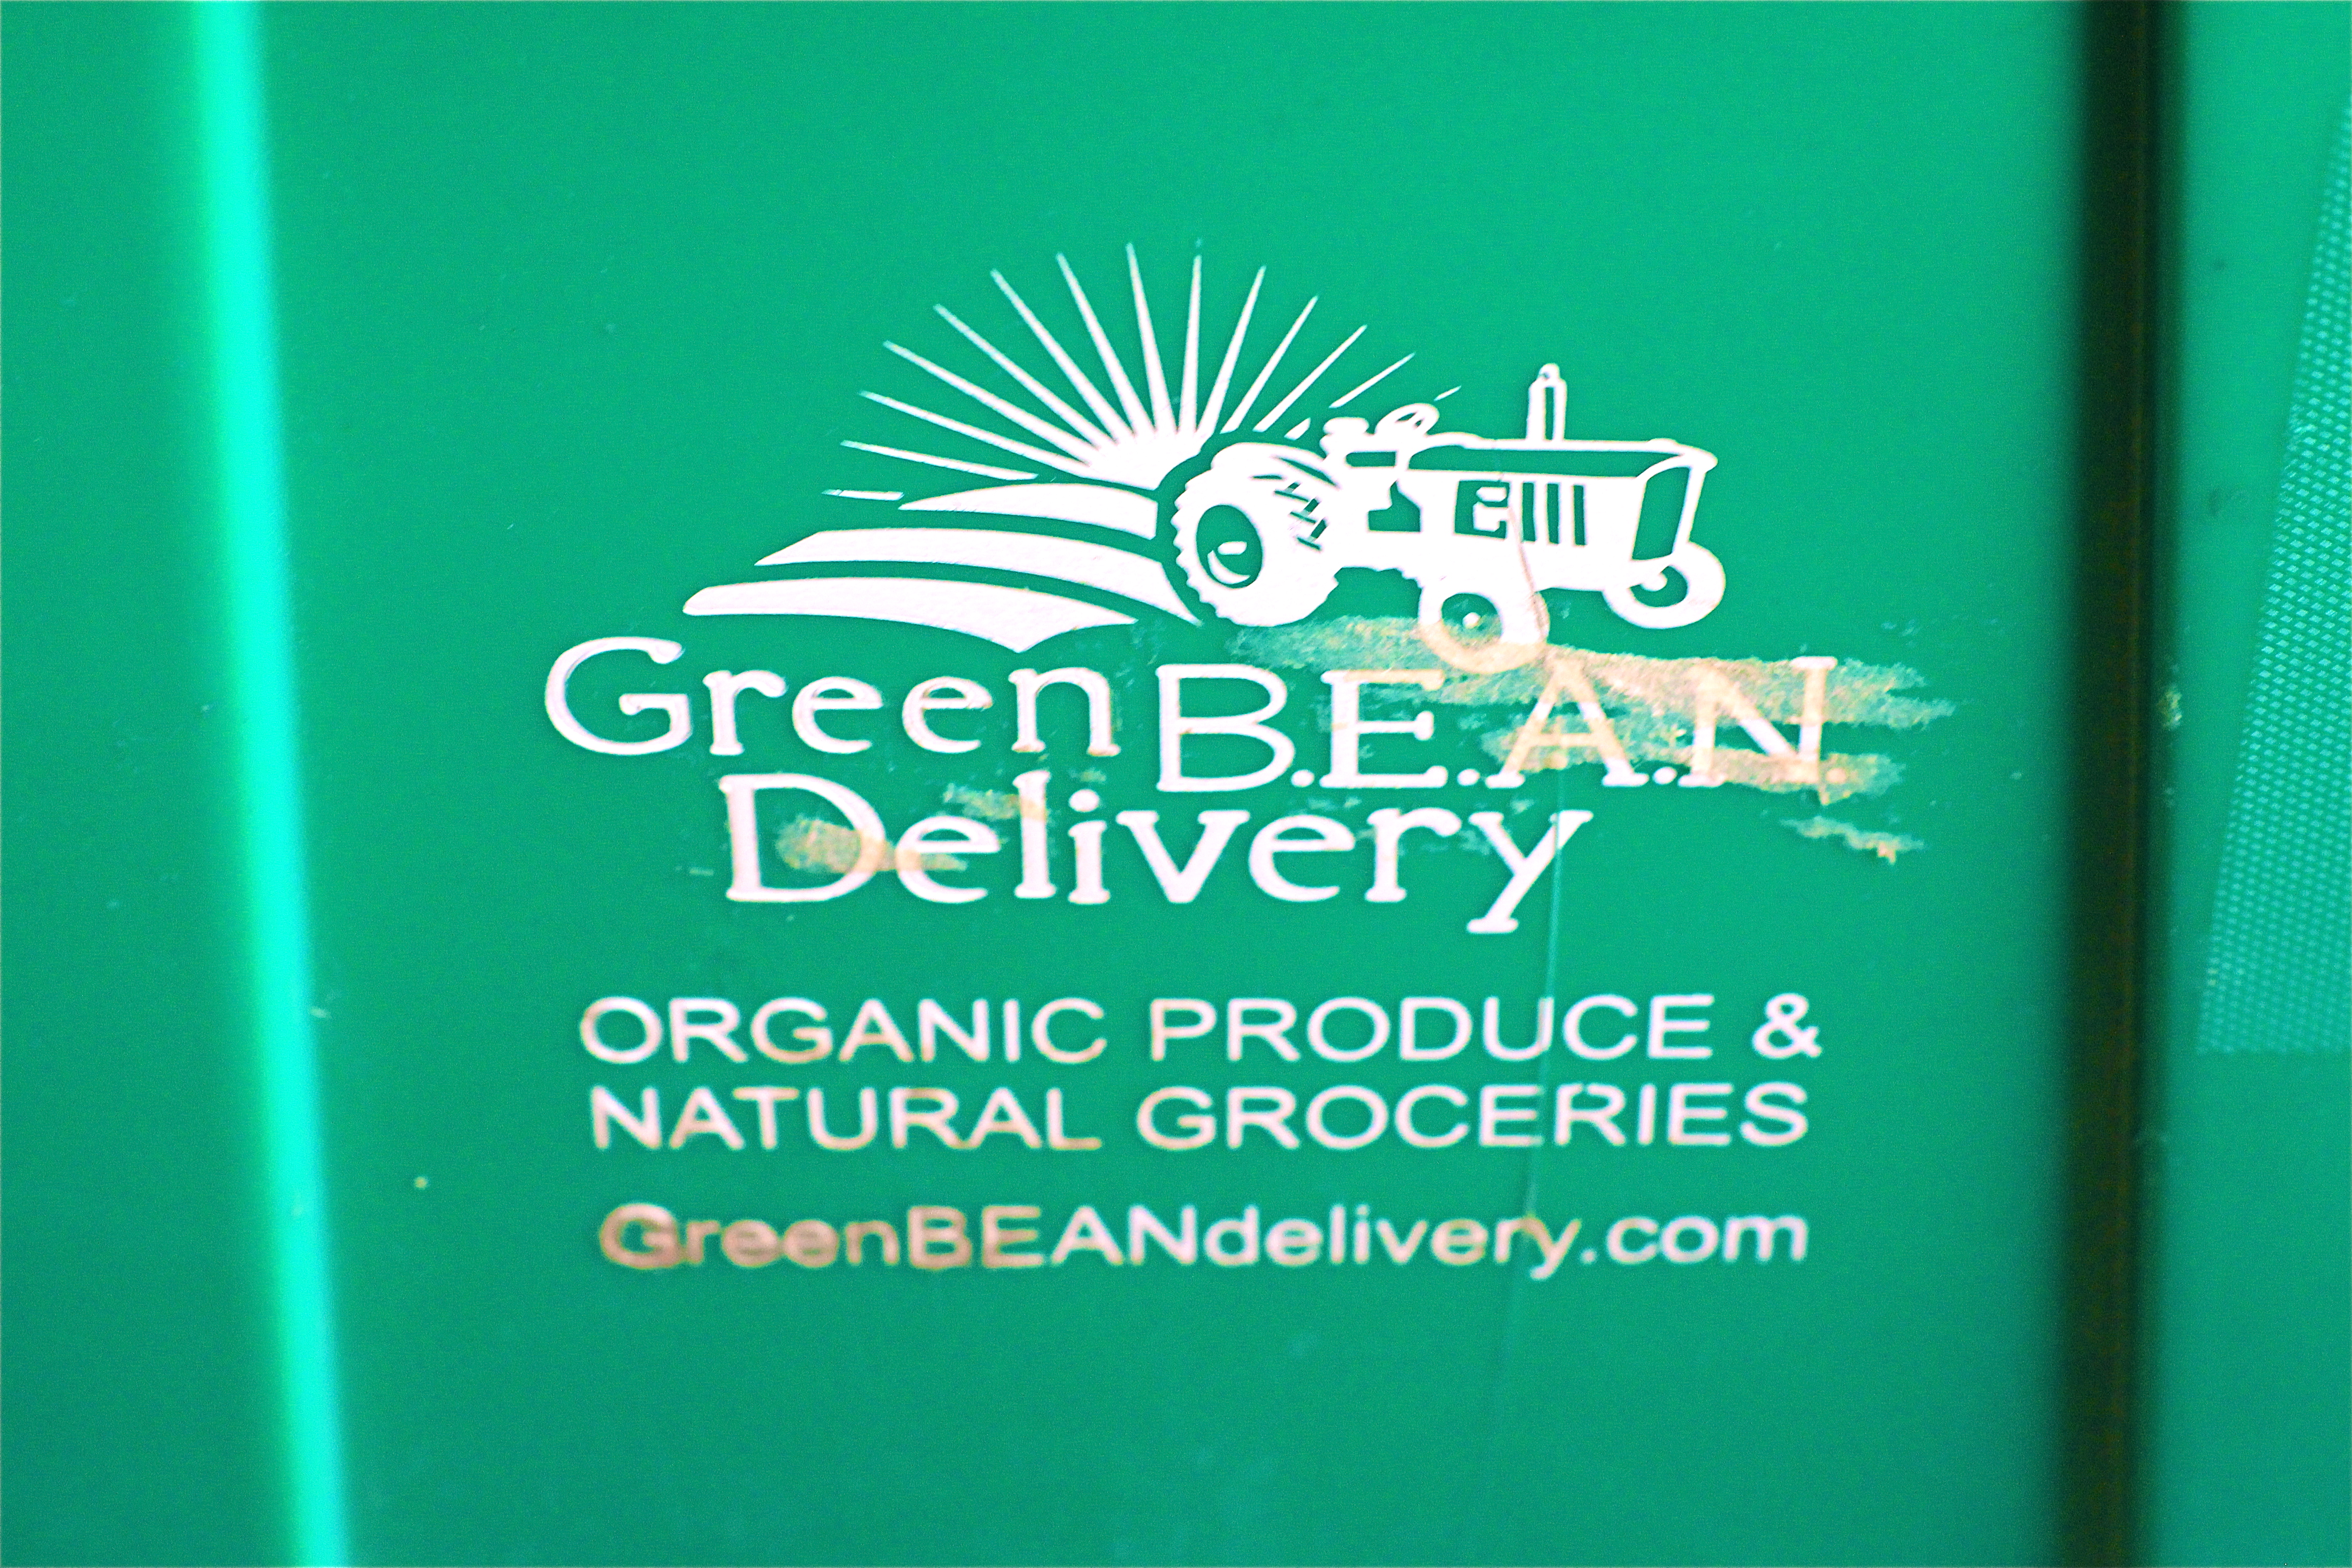 Organic-produce-groceries-Green-Bean-Delivery-Ohio-Columbus-girl-about-columbus